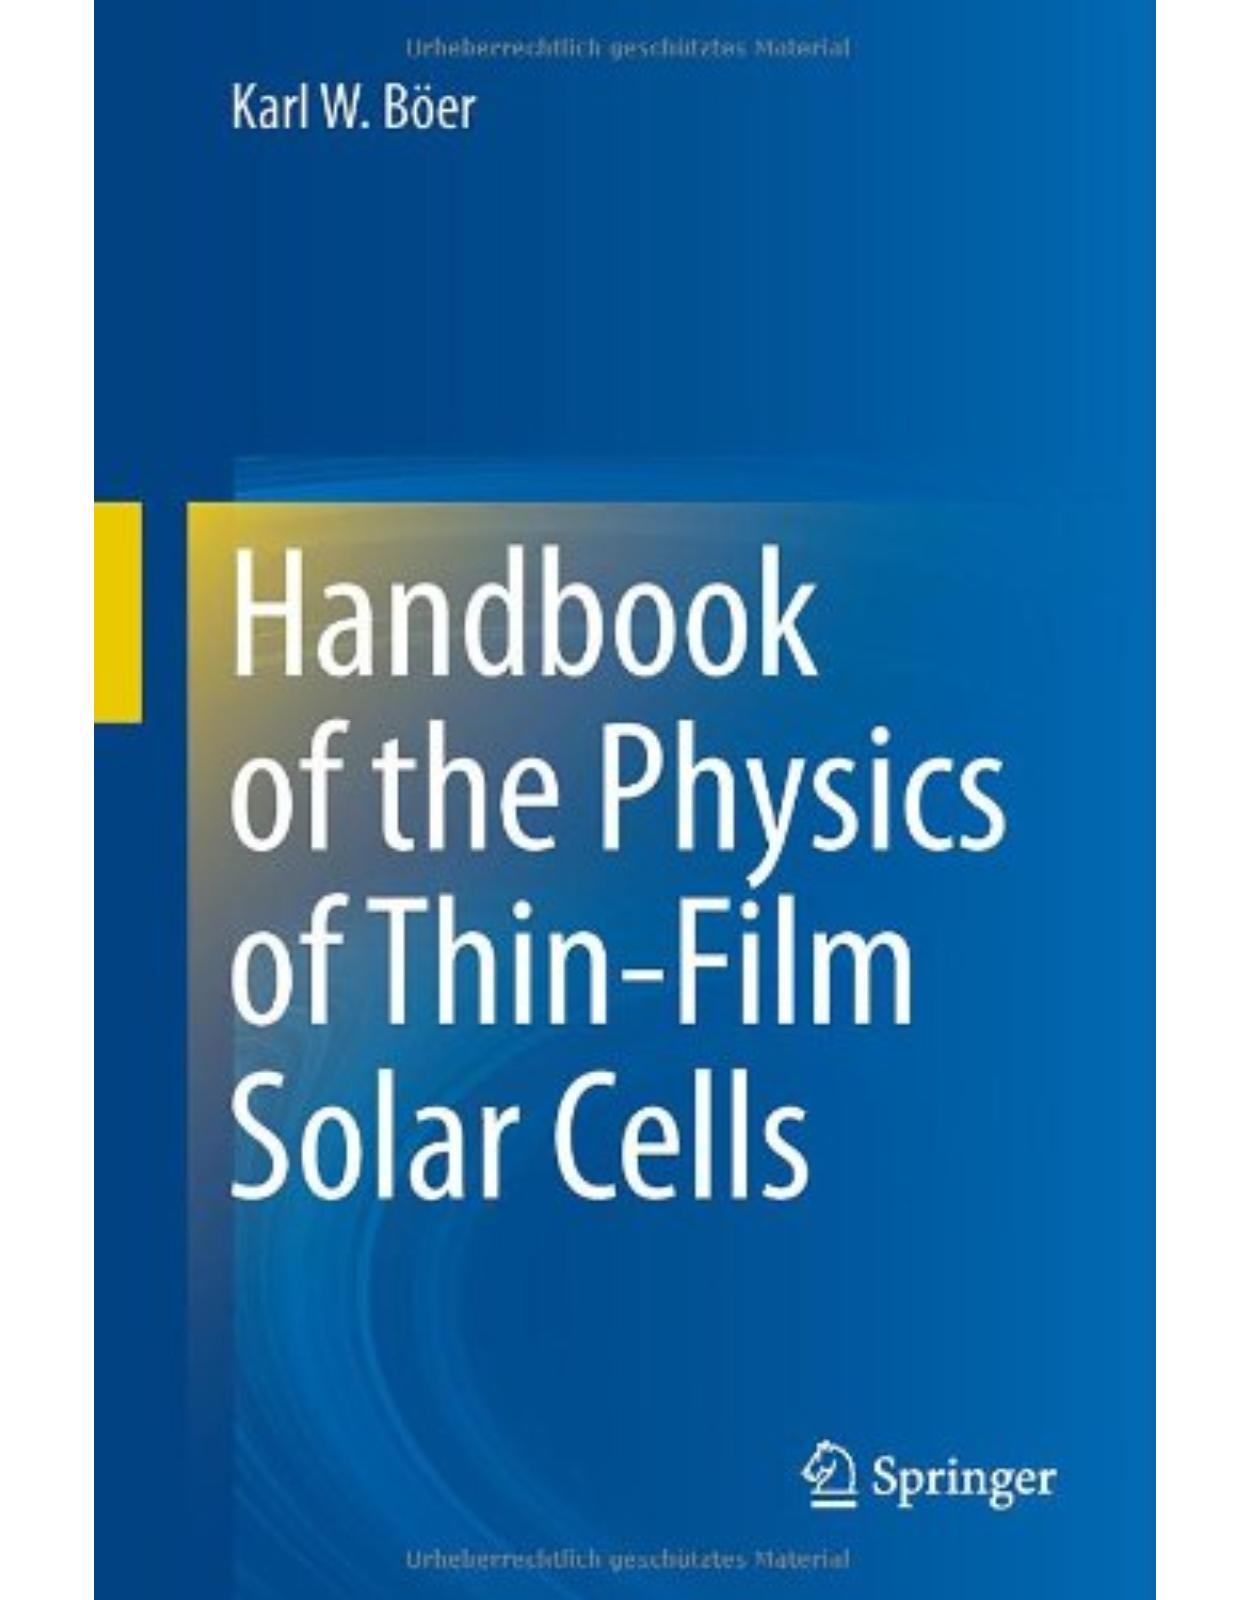 Handbook of the Physics of ThinFilm Solar Cells